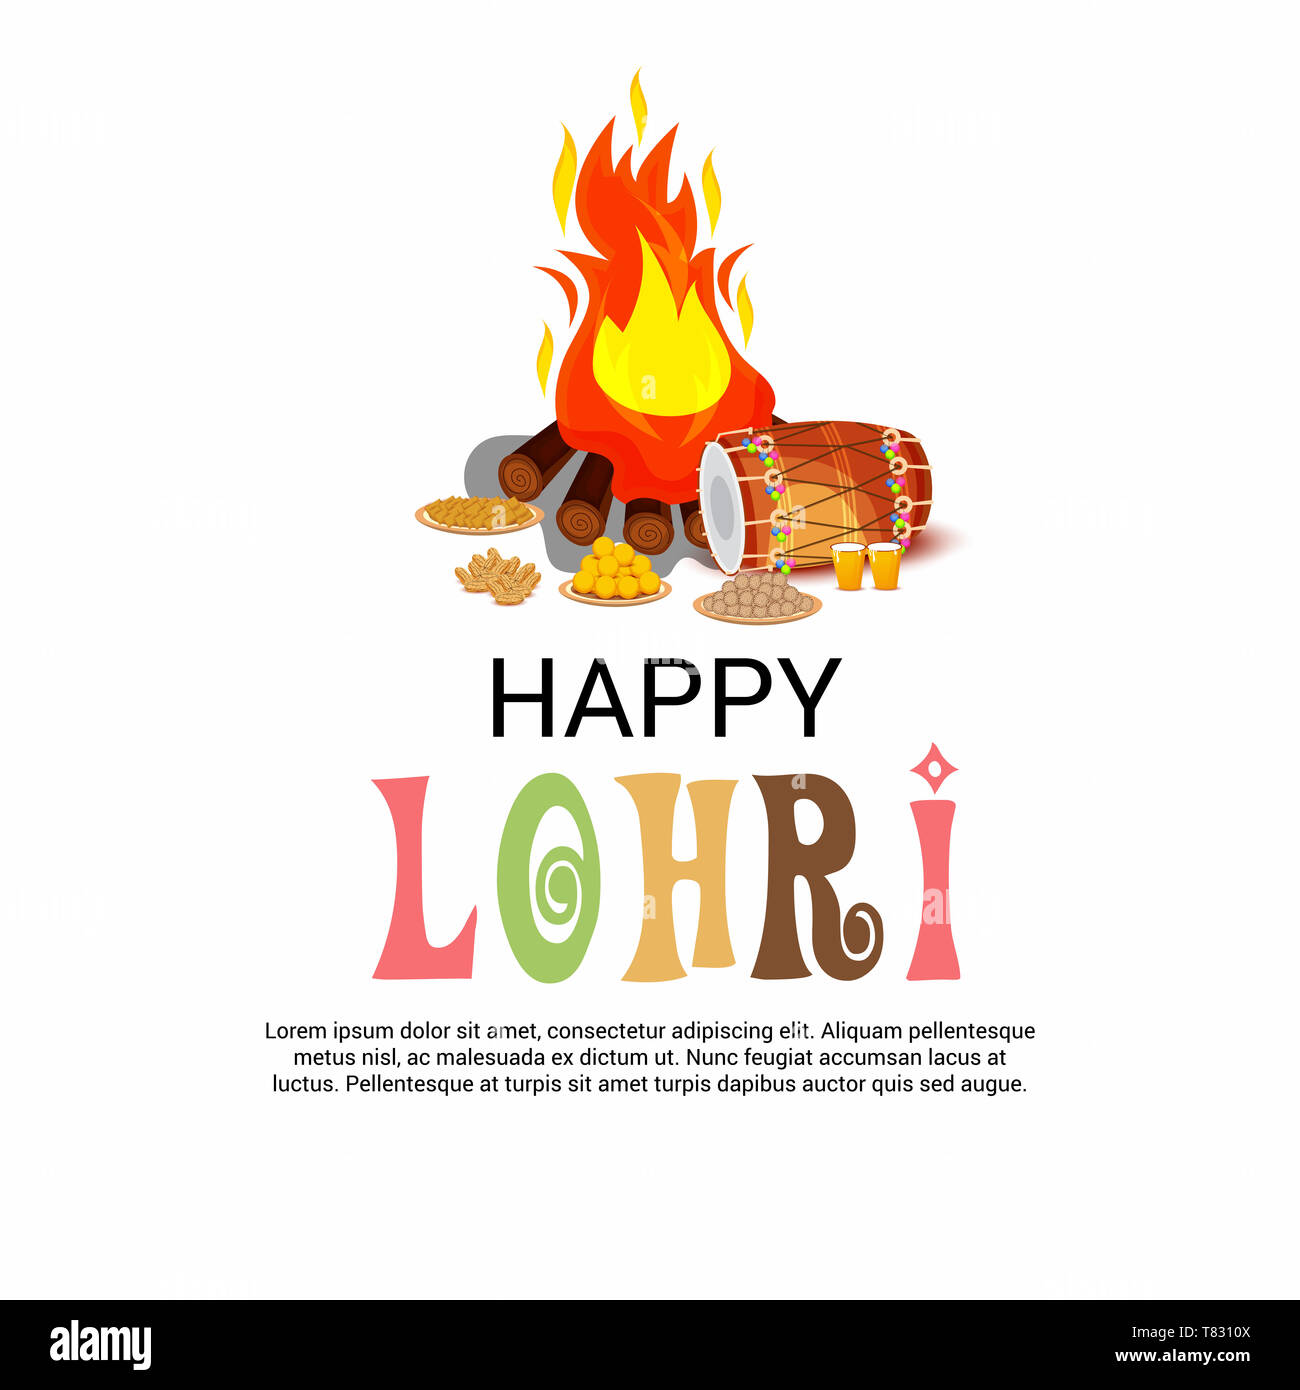 Lohri Cut Out Stock Images & Pictures - Alamy